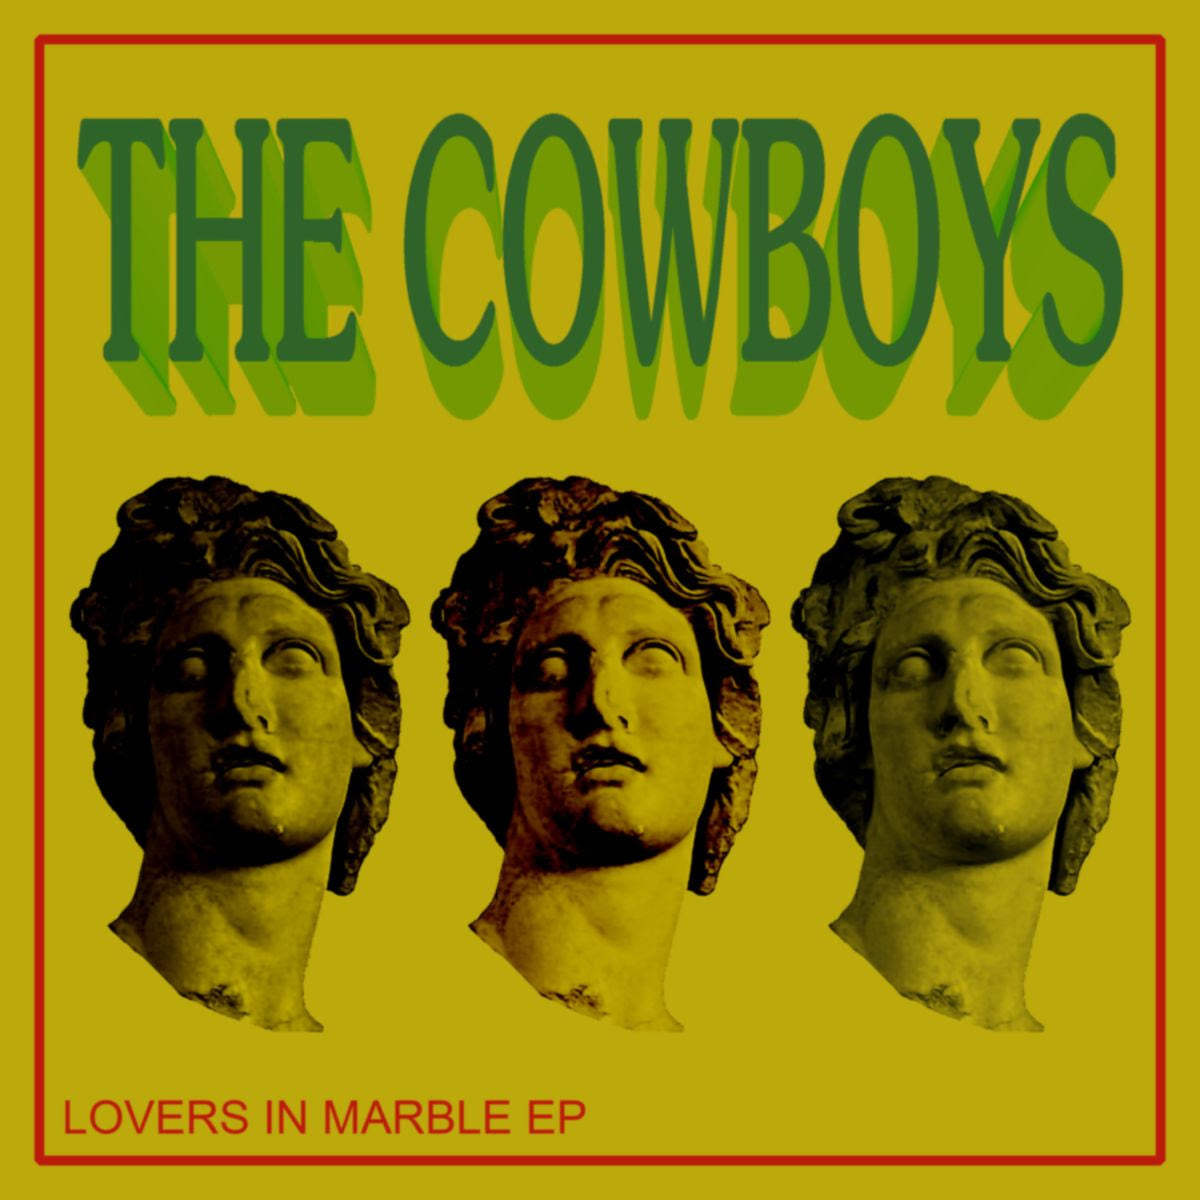 COWBOYS - LOVERS IN MARBLE CASSETTE